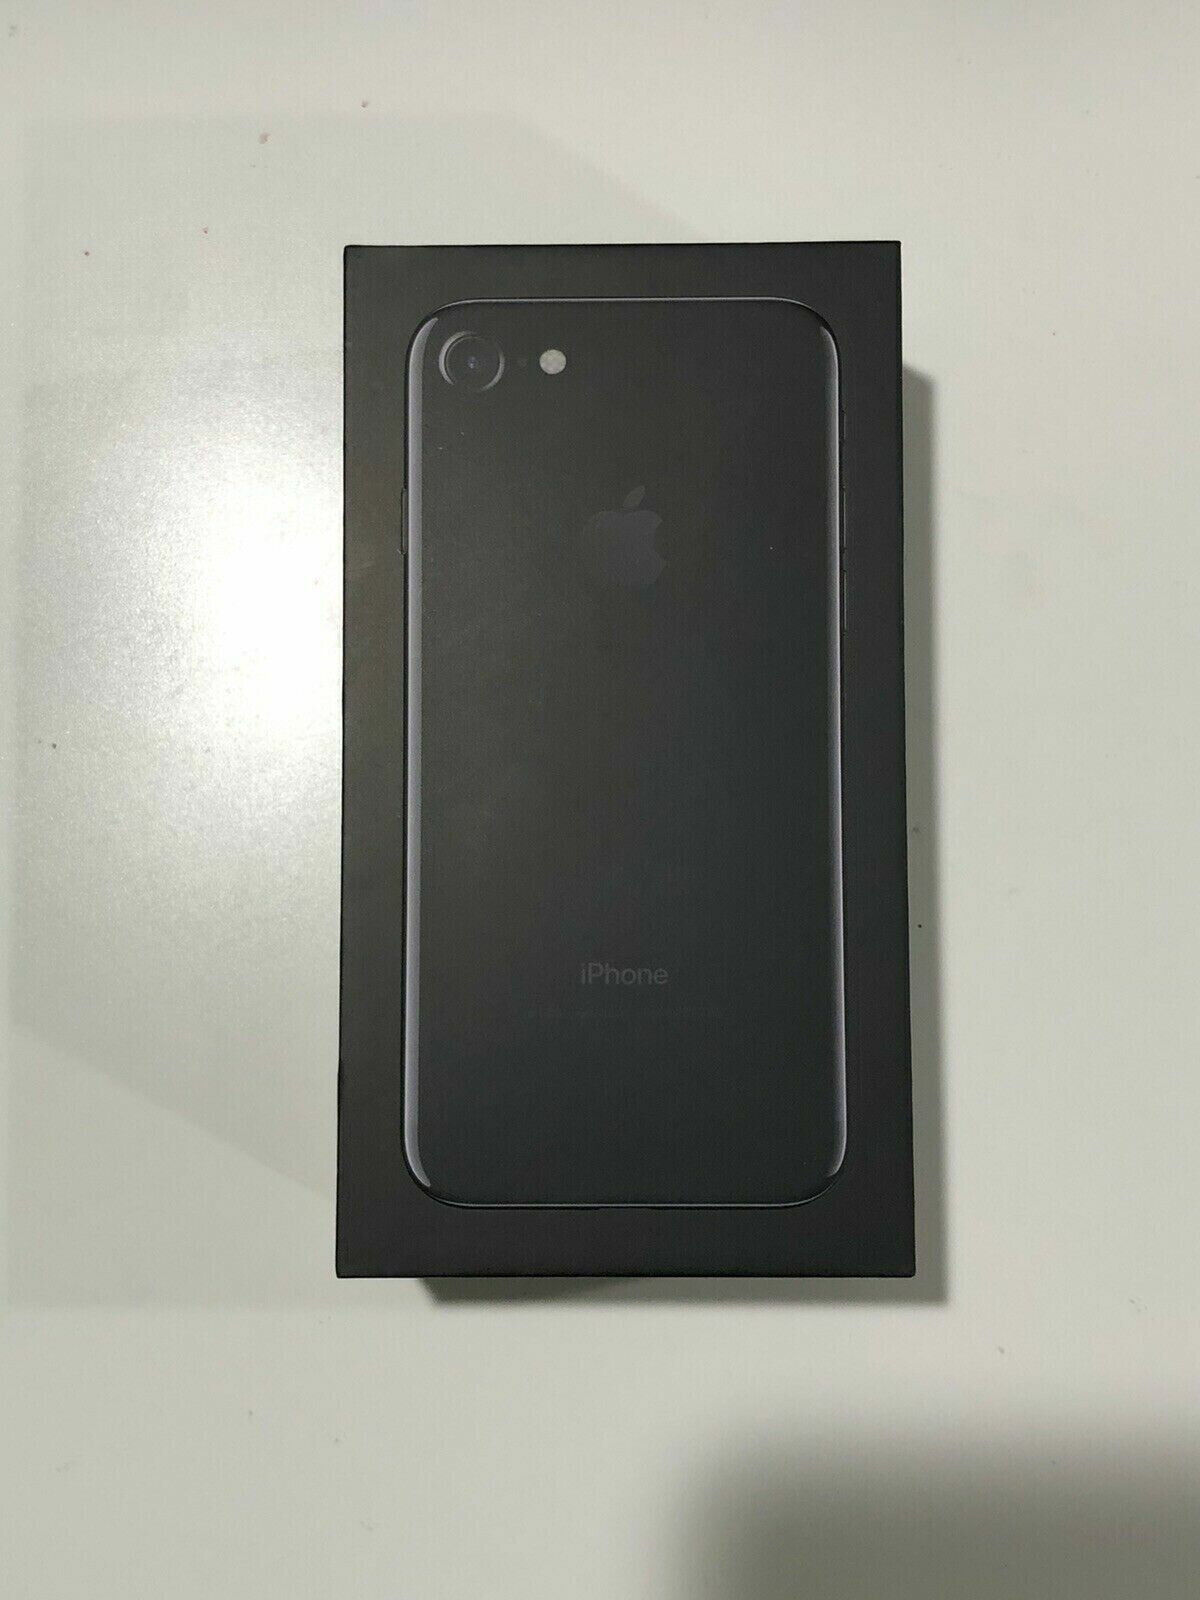 Primary image for Apple iPhone 7 128GB OEM Box ONLY, Jet Black Color, FREE Shipping